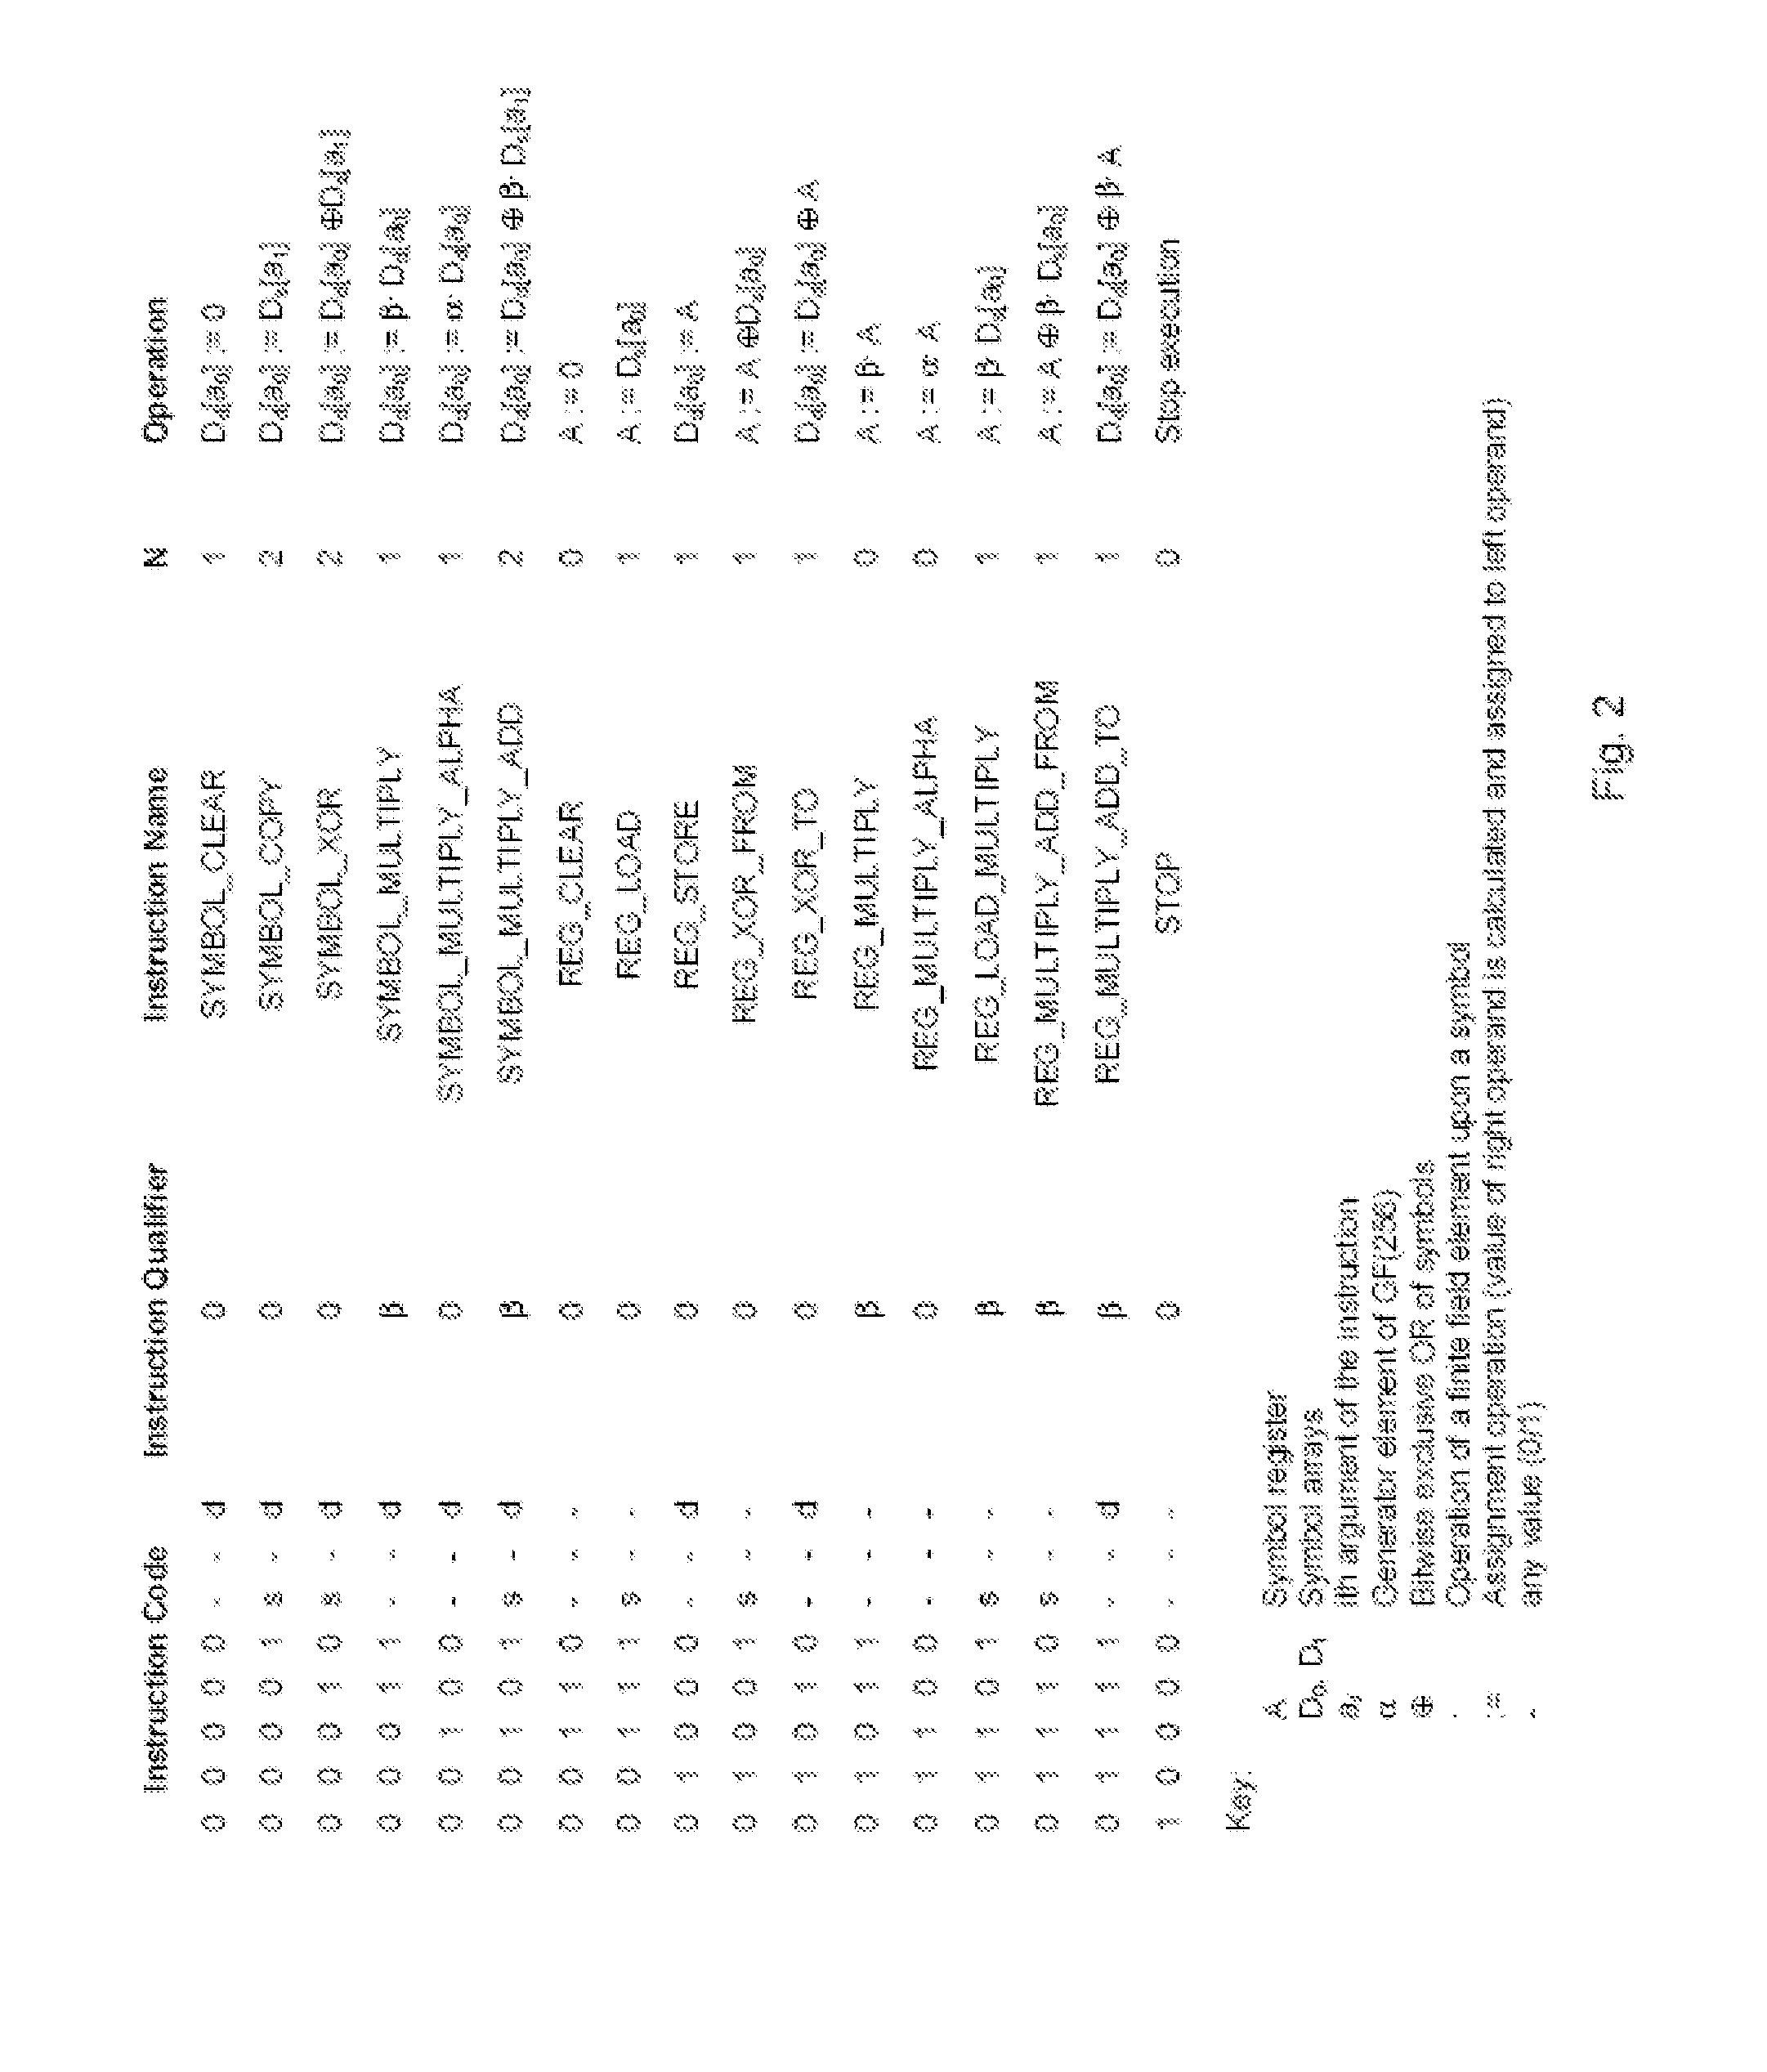 Efficient encoding and decoding methods for representing schedules and processing forward error correction codes